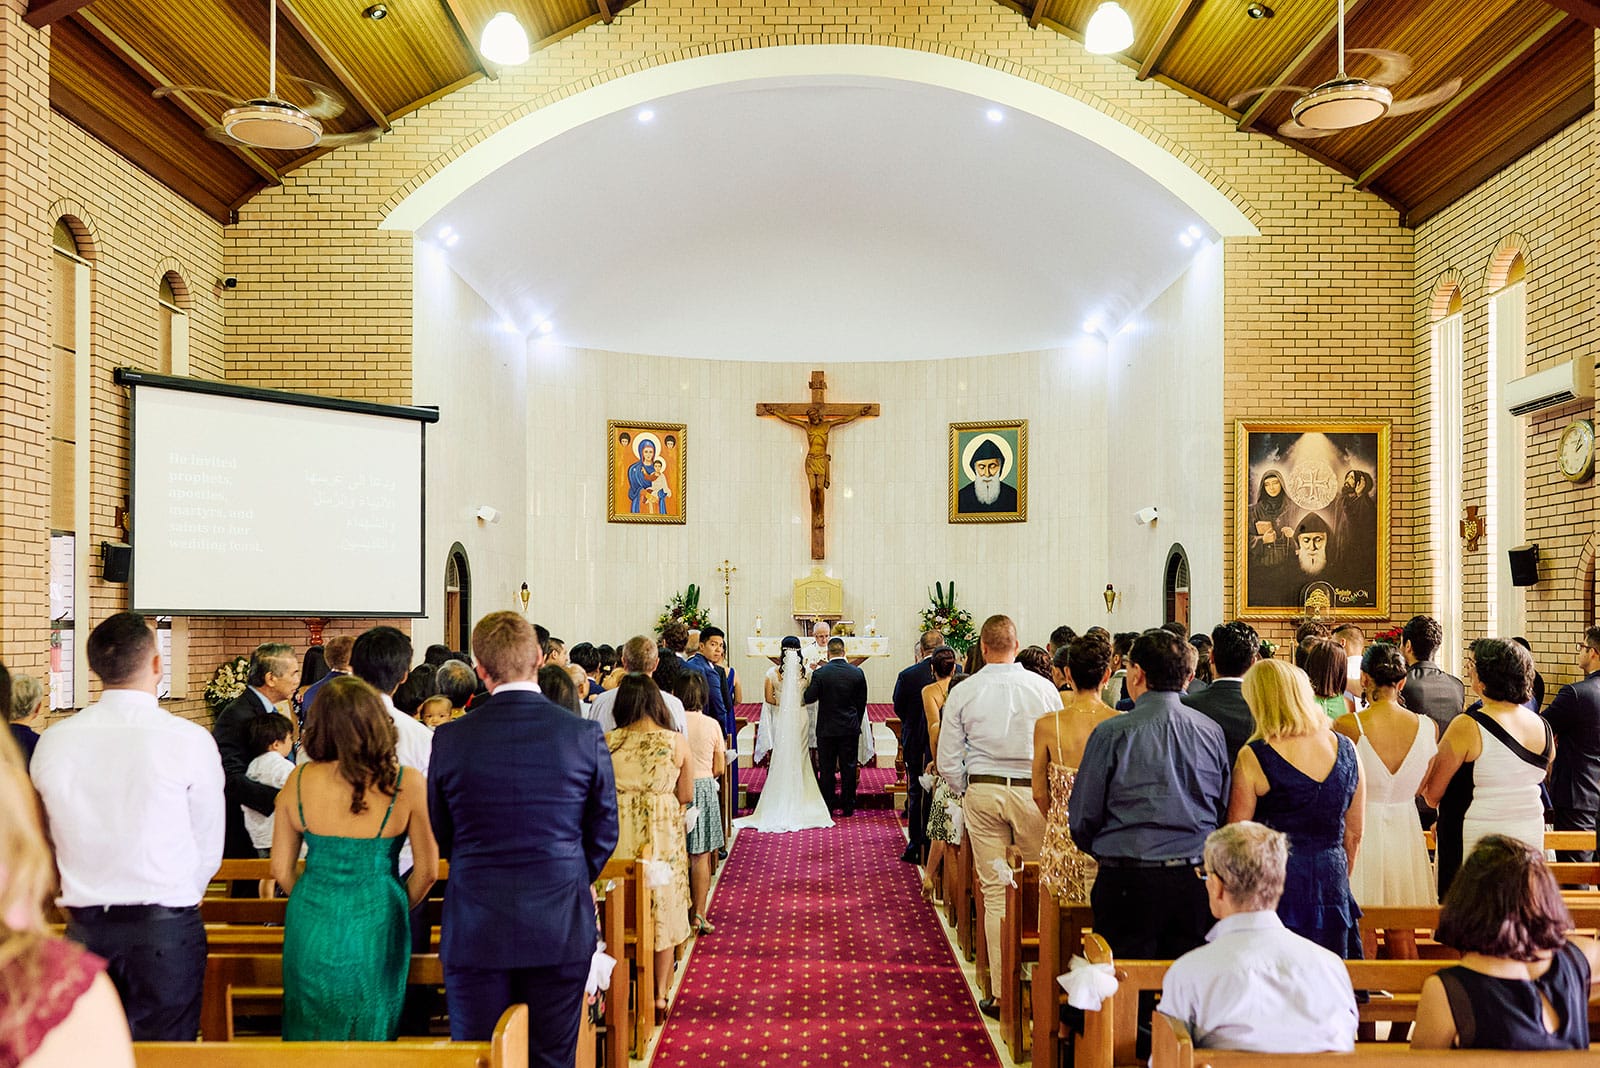 Wedding ceremony at St Charbel's in Punchbowl